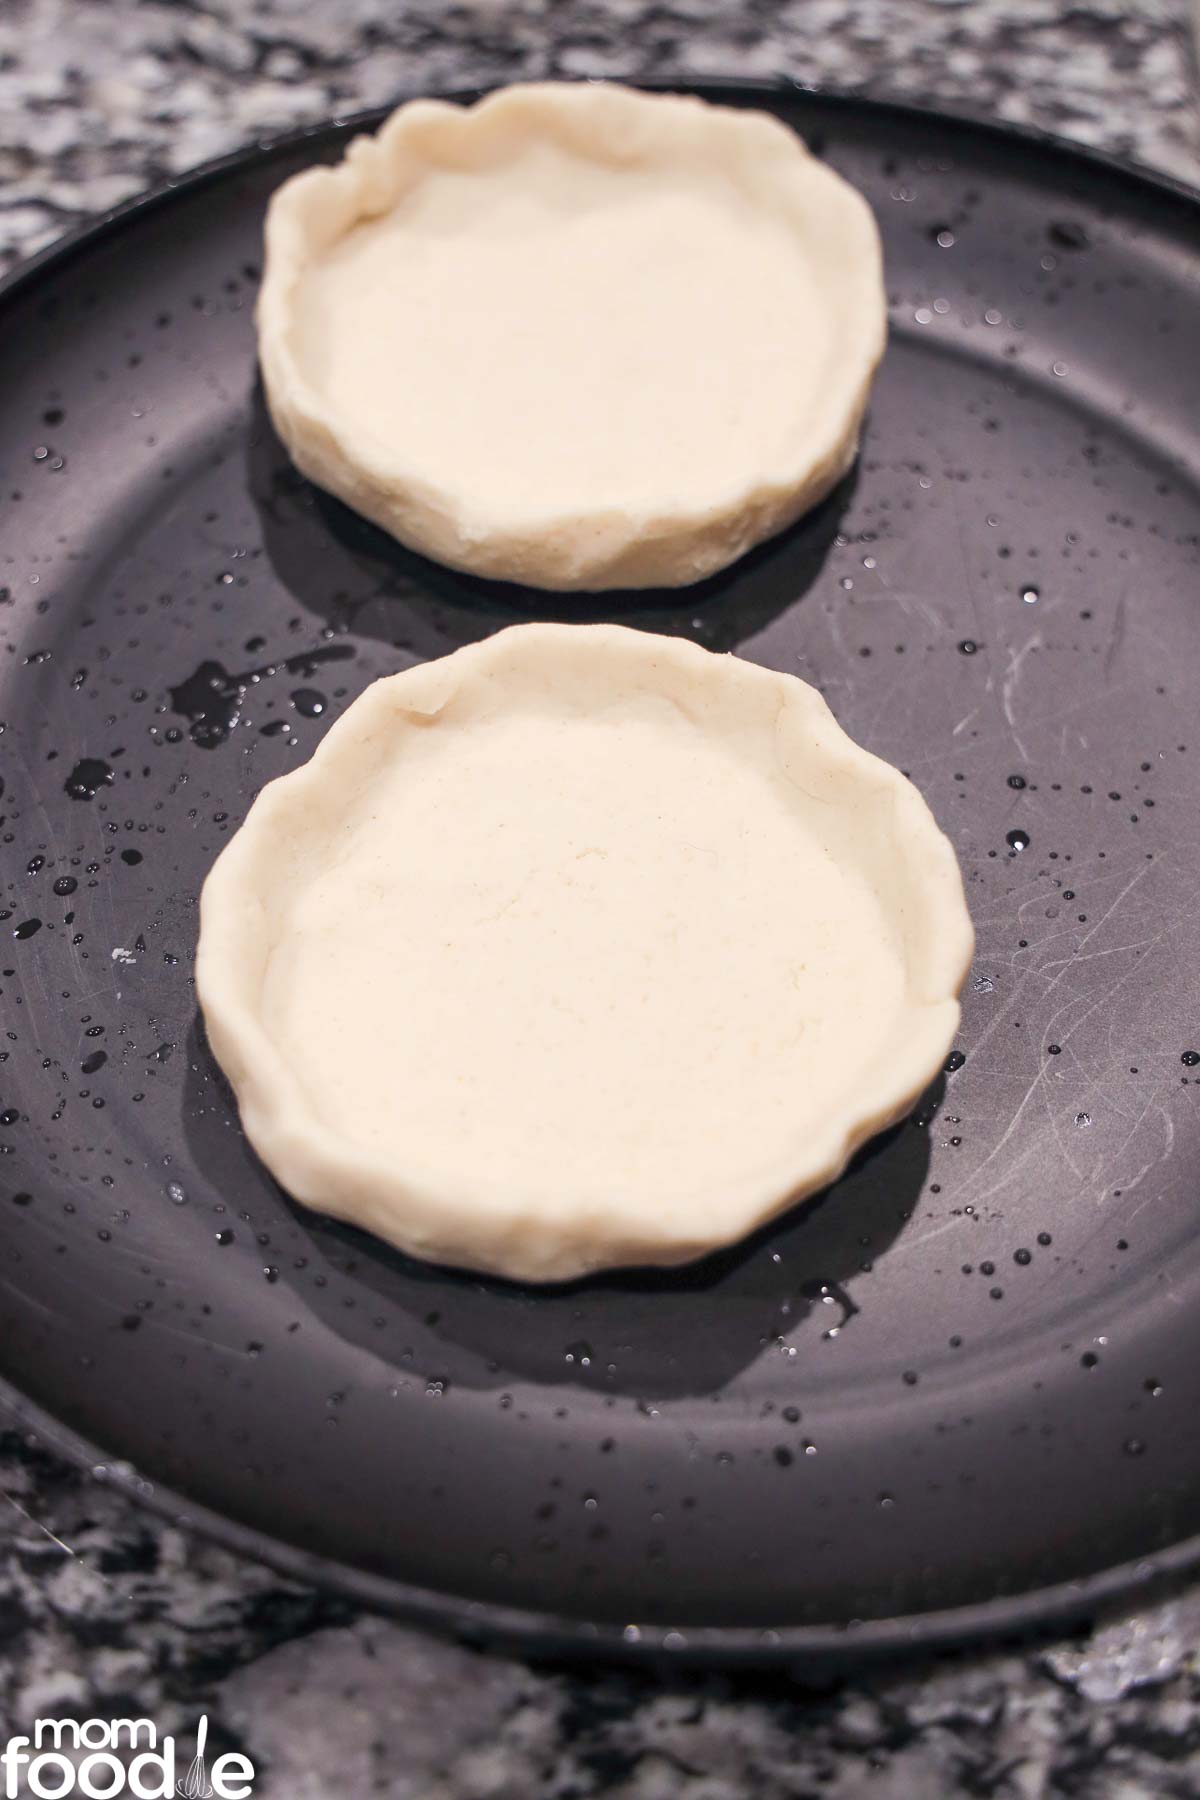 shaping the sopes shell.